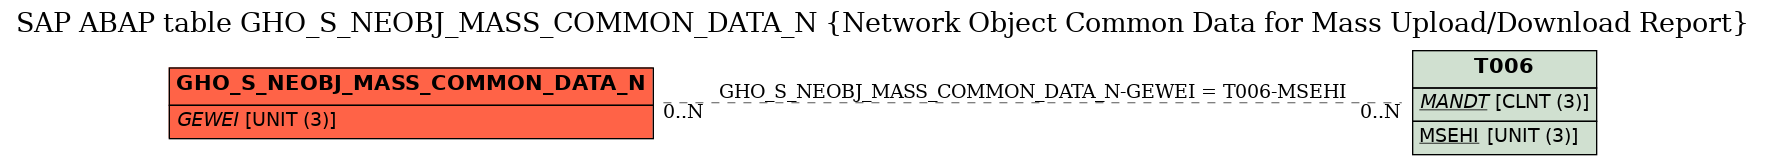 E-R Diagram for table GHO_S_NEOBJ_MASS_COMMON_DATA_N (Network Object Common Data for Mass Upload/Download Report)